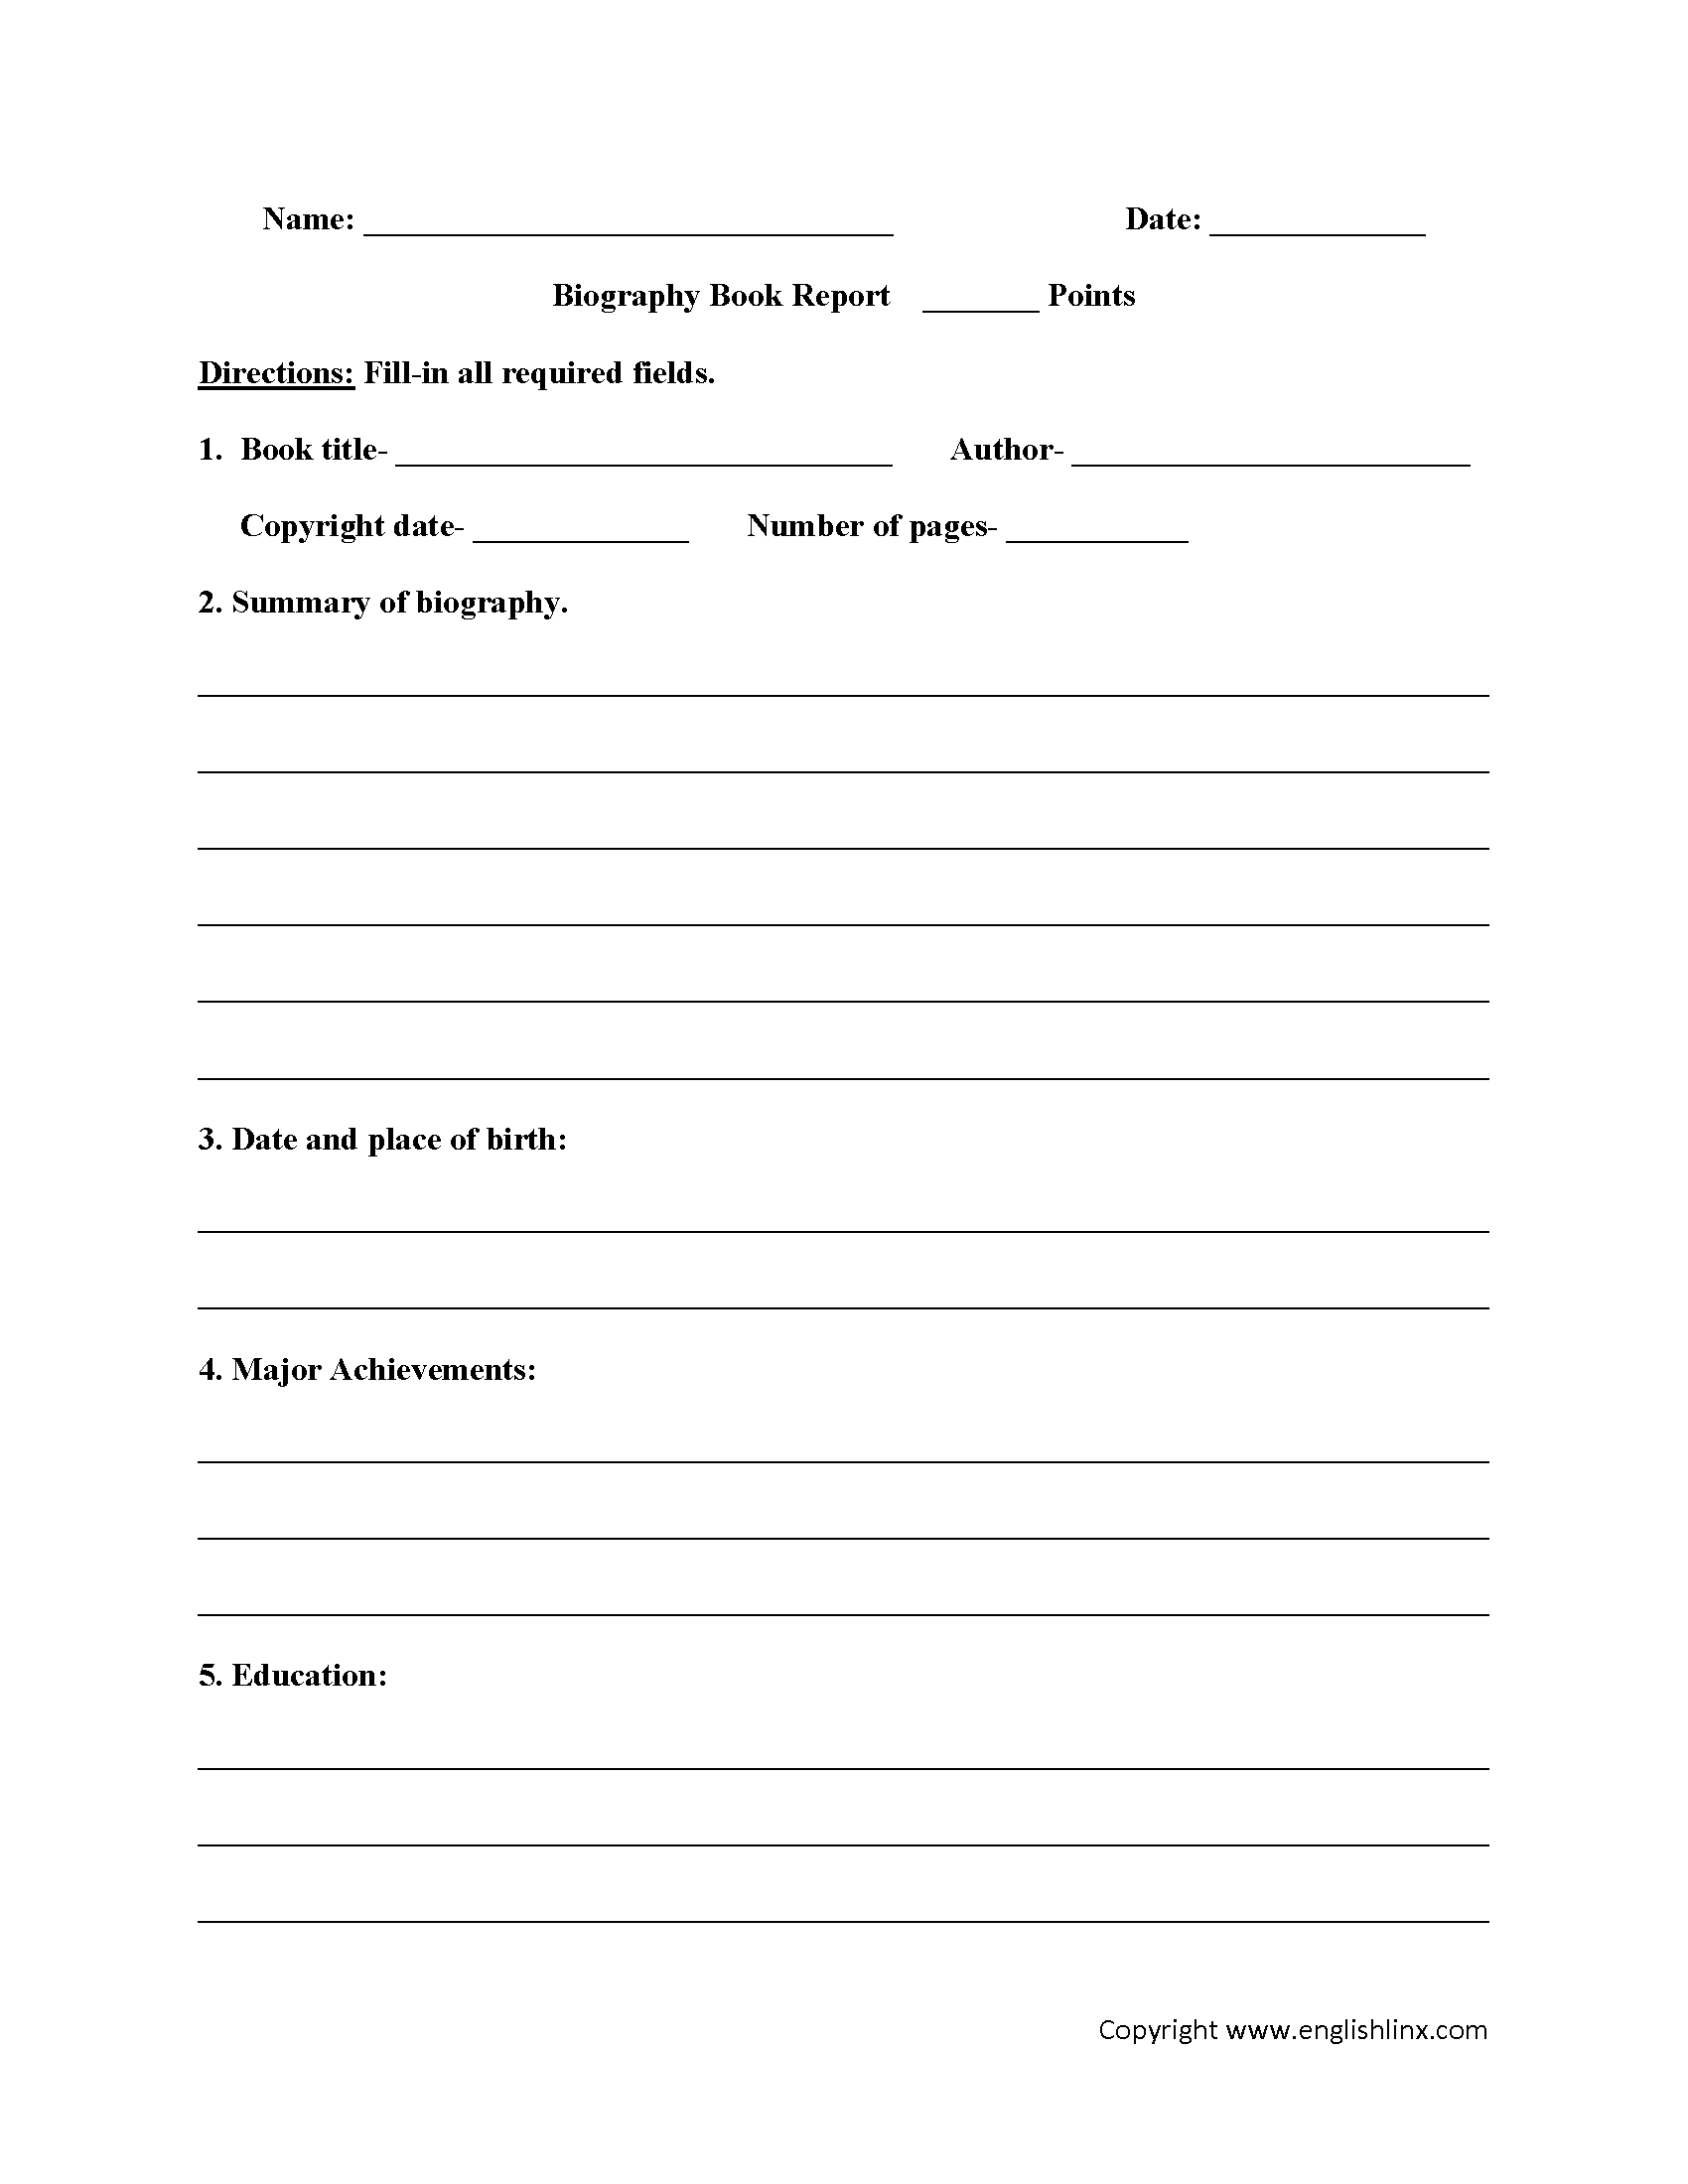 Englishlinx | Book Report Worksheets Within Middle School Book Report Template